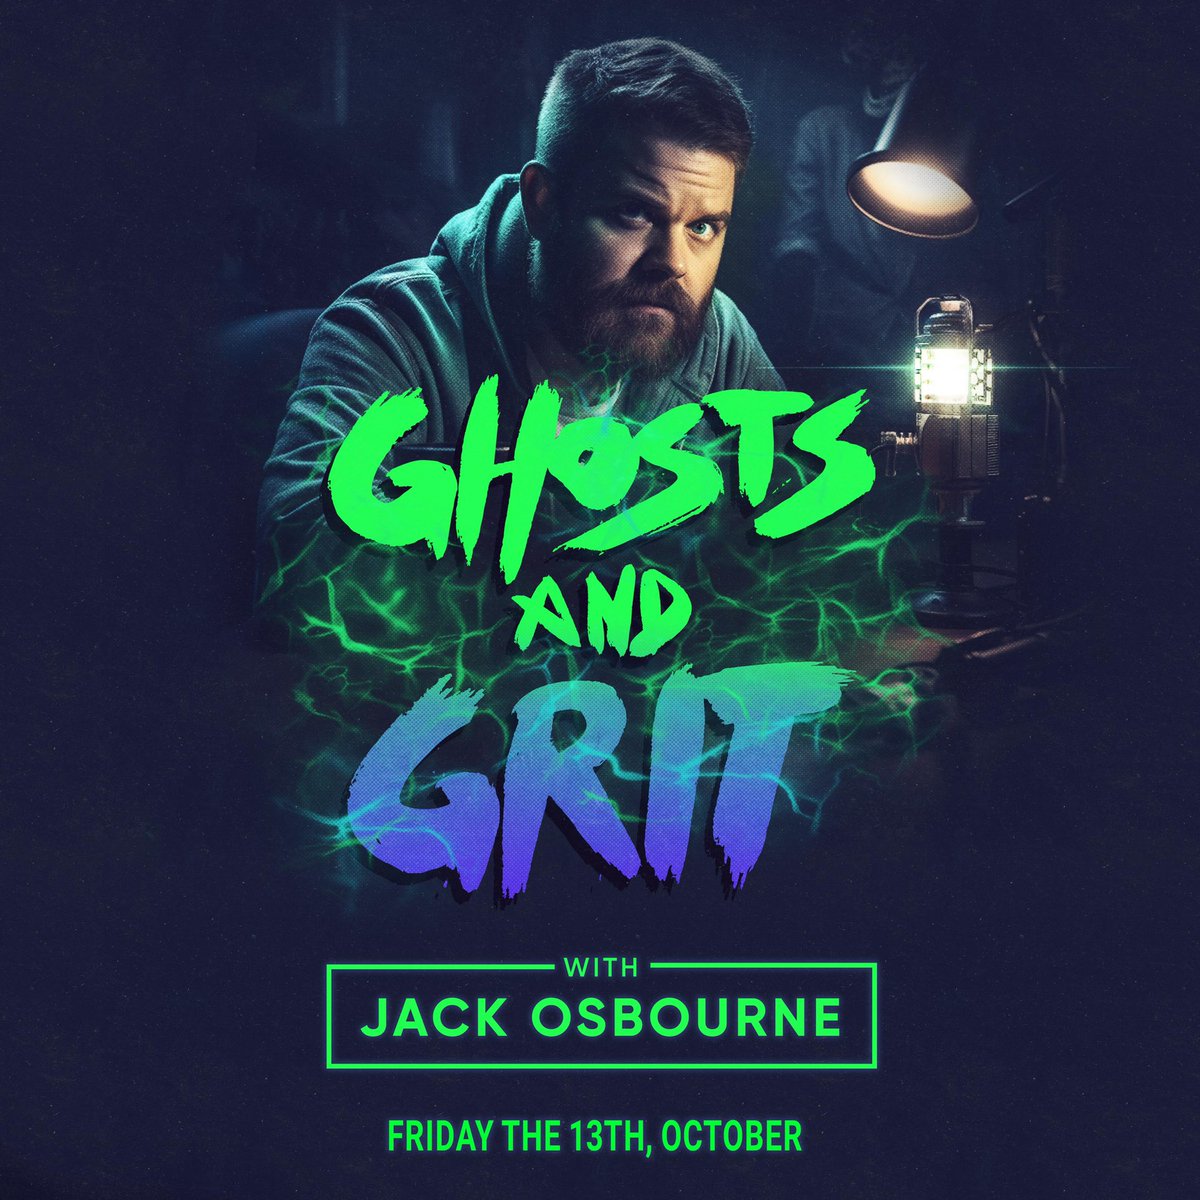 Announcement day! Jack is just 7 days away from the launch of his new podcast “Ghosts and Grit”. Brace yourself for a wild journey through the supernatural and explore the gritty side of life like never before. 👻✨Head to  @JackOsbournePodcast on Youtube, @jackosbourne on